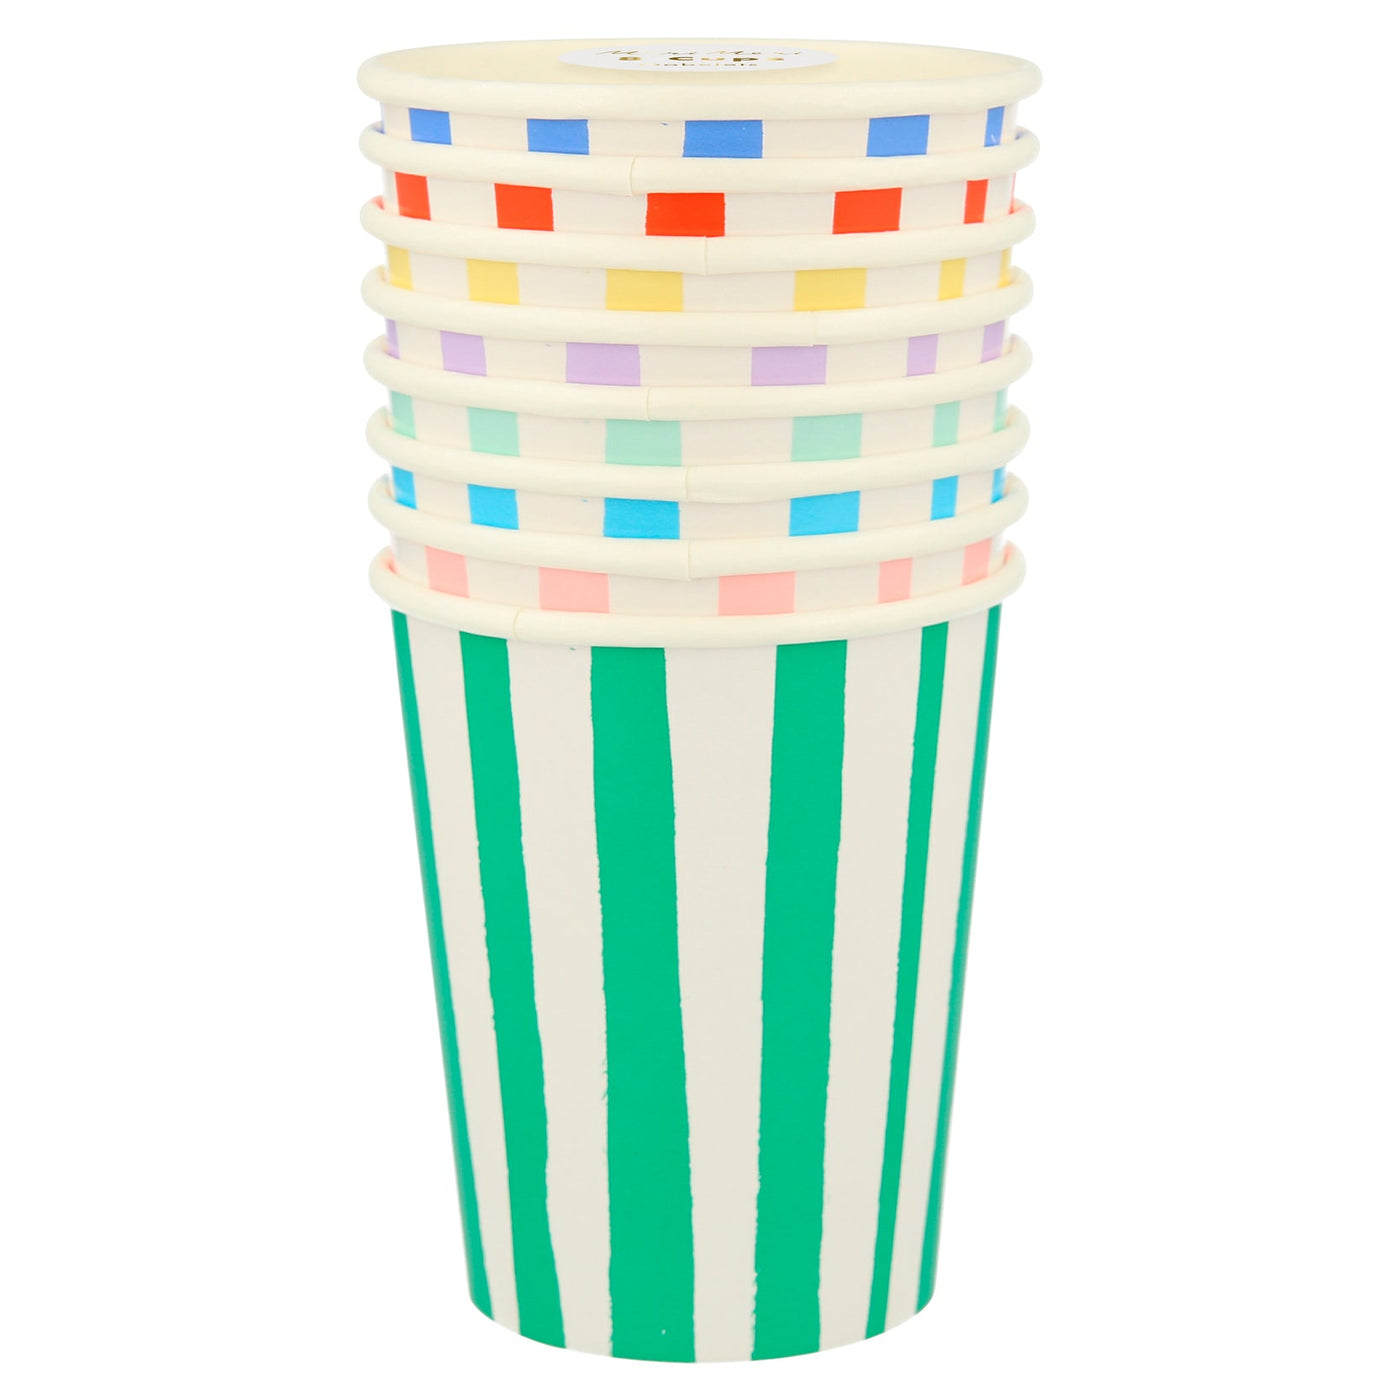 Mixed Stripe Paper Cups